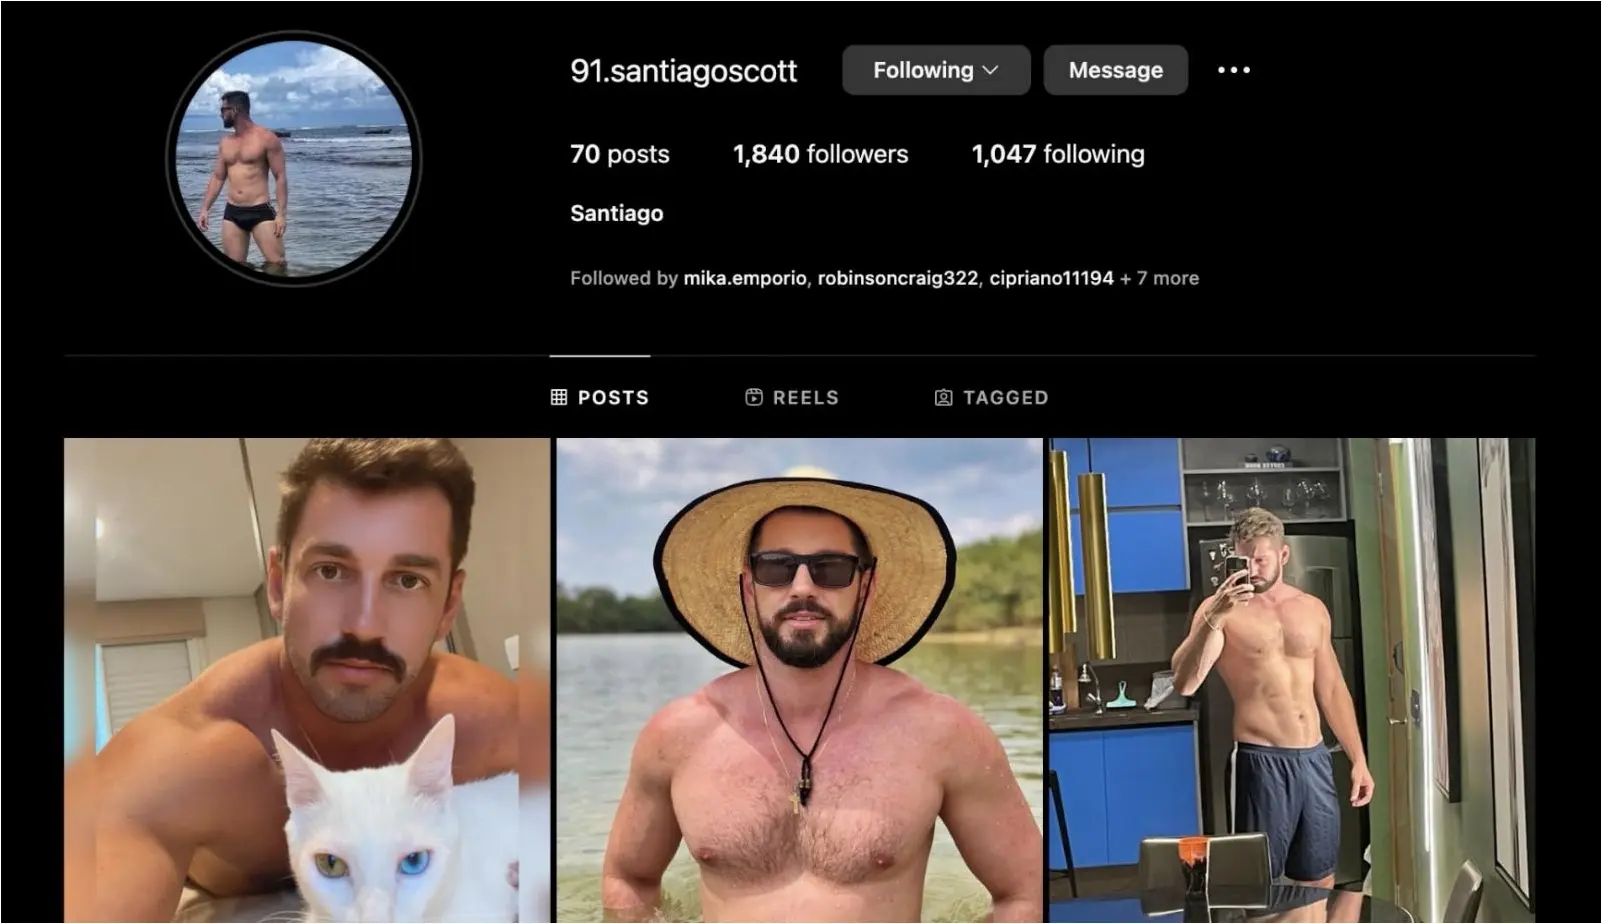 Fake Instagram profile abusing someone else's pictures